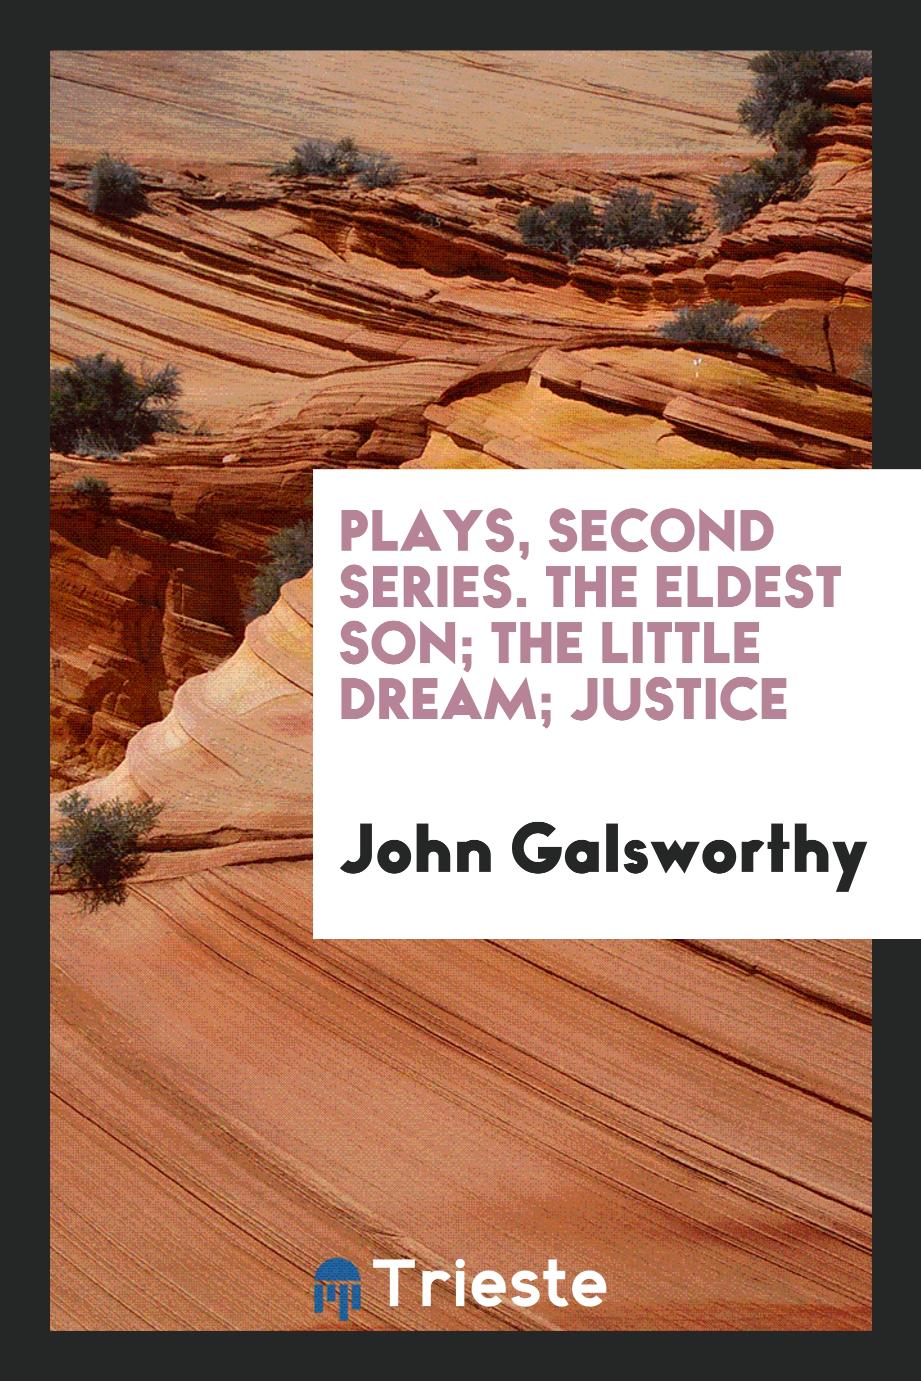 Plays, second series. The eldest son; The little dream; Justice